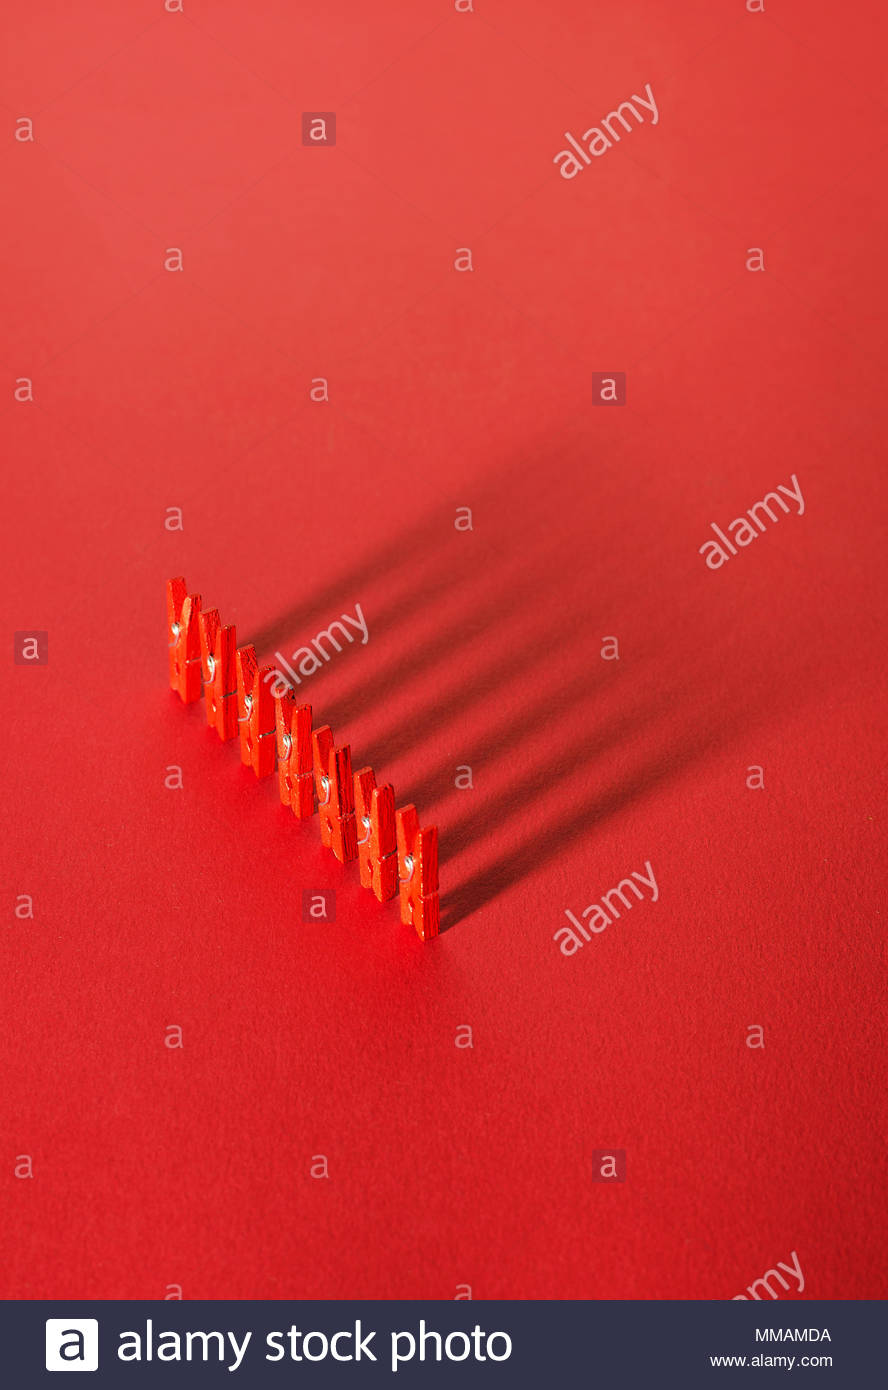 Red Laundry Clips Anized In A Row Over Background Stock